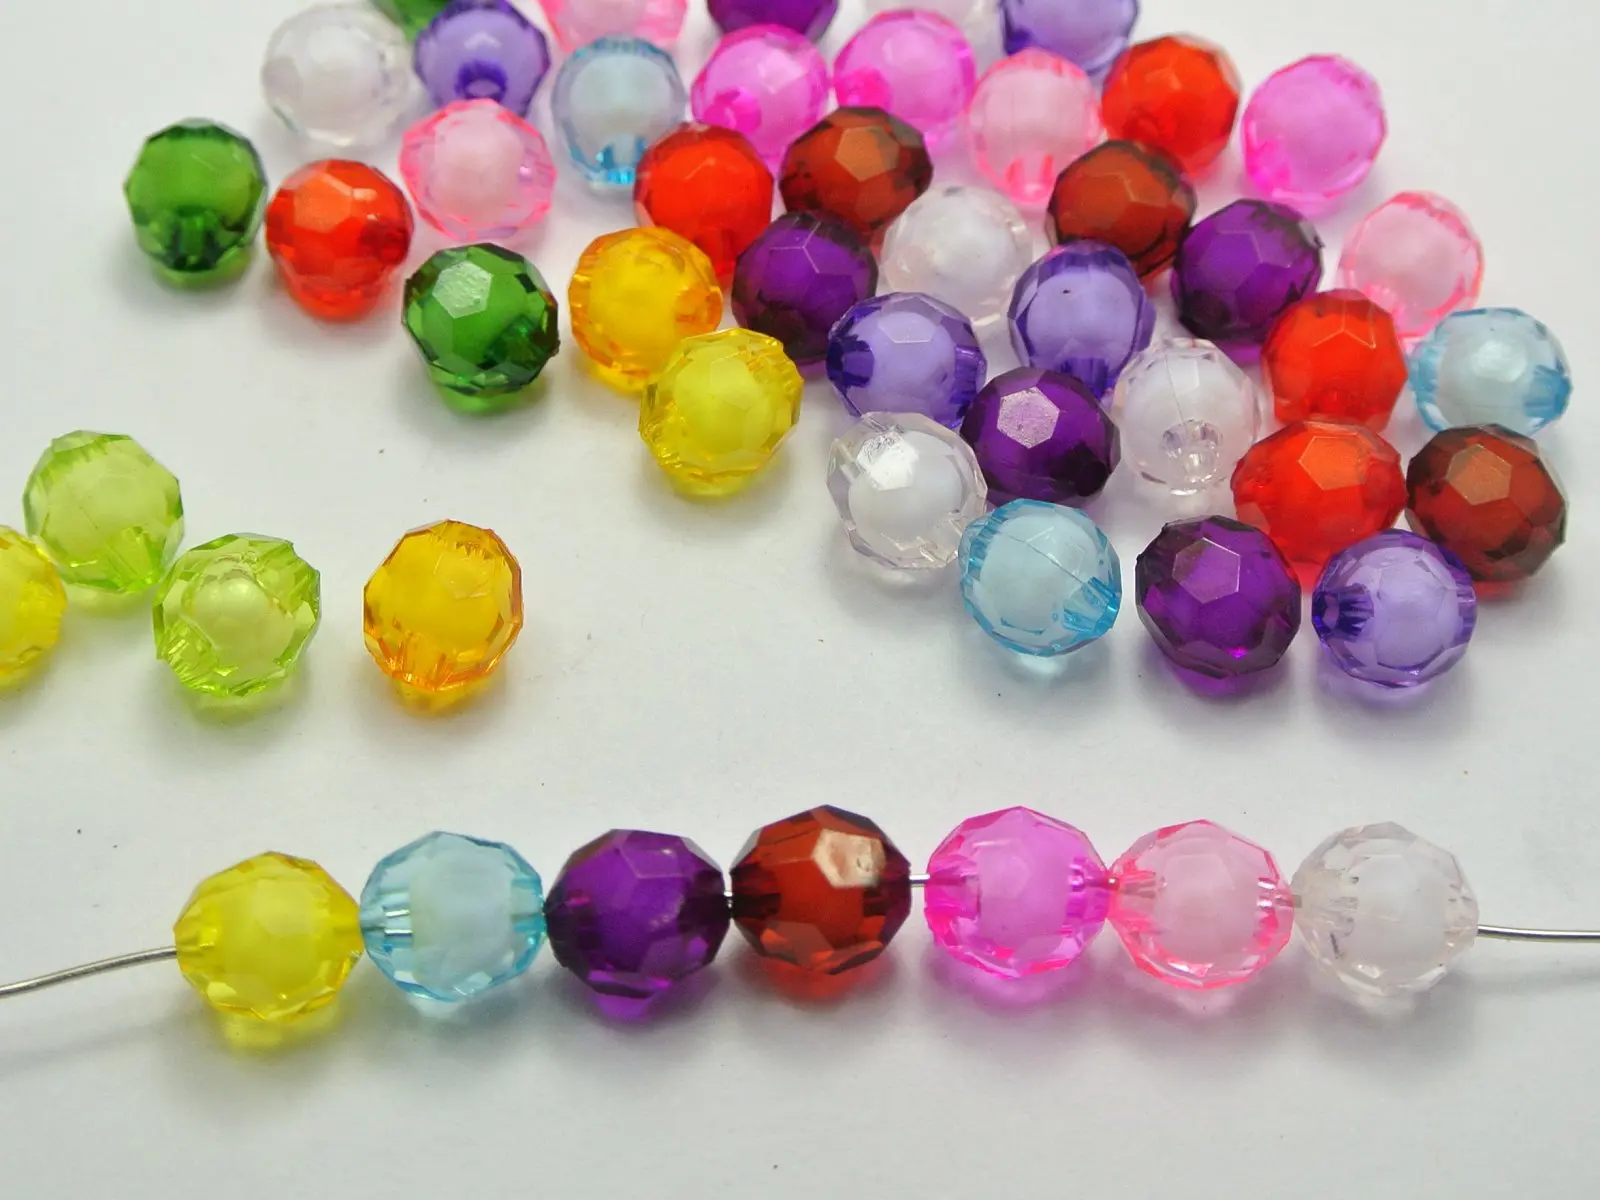 

100 Mixed Color Acrylic Faceted Round Beads 10mm "Bead in Bead"